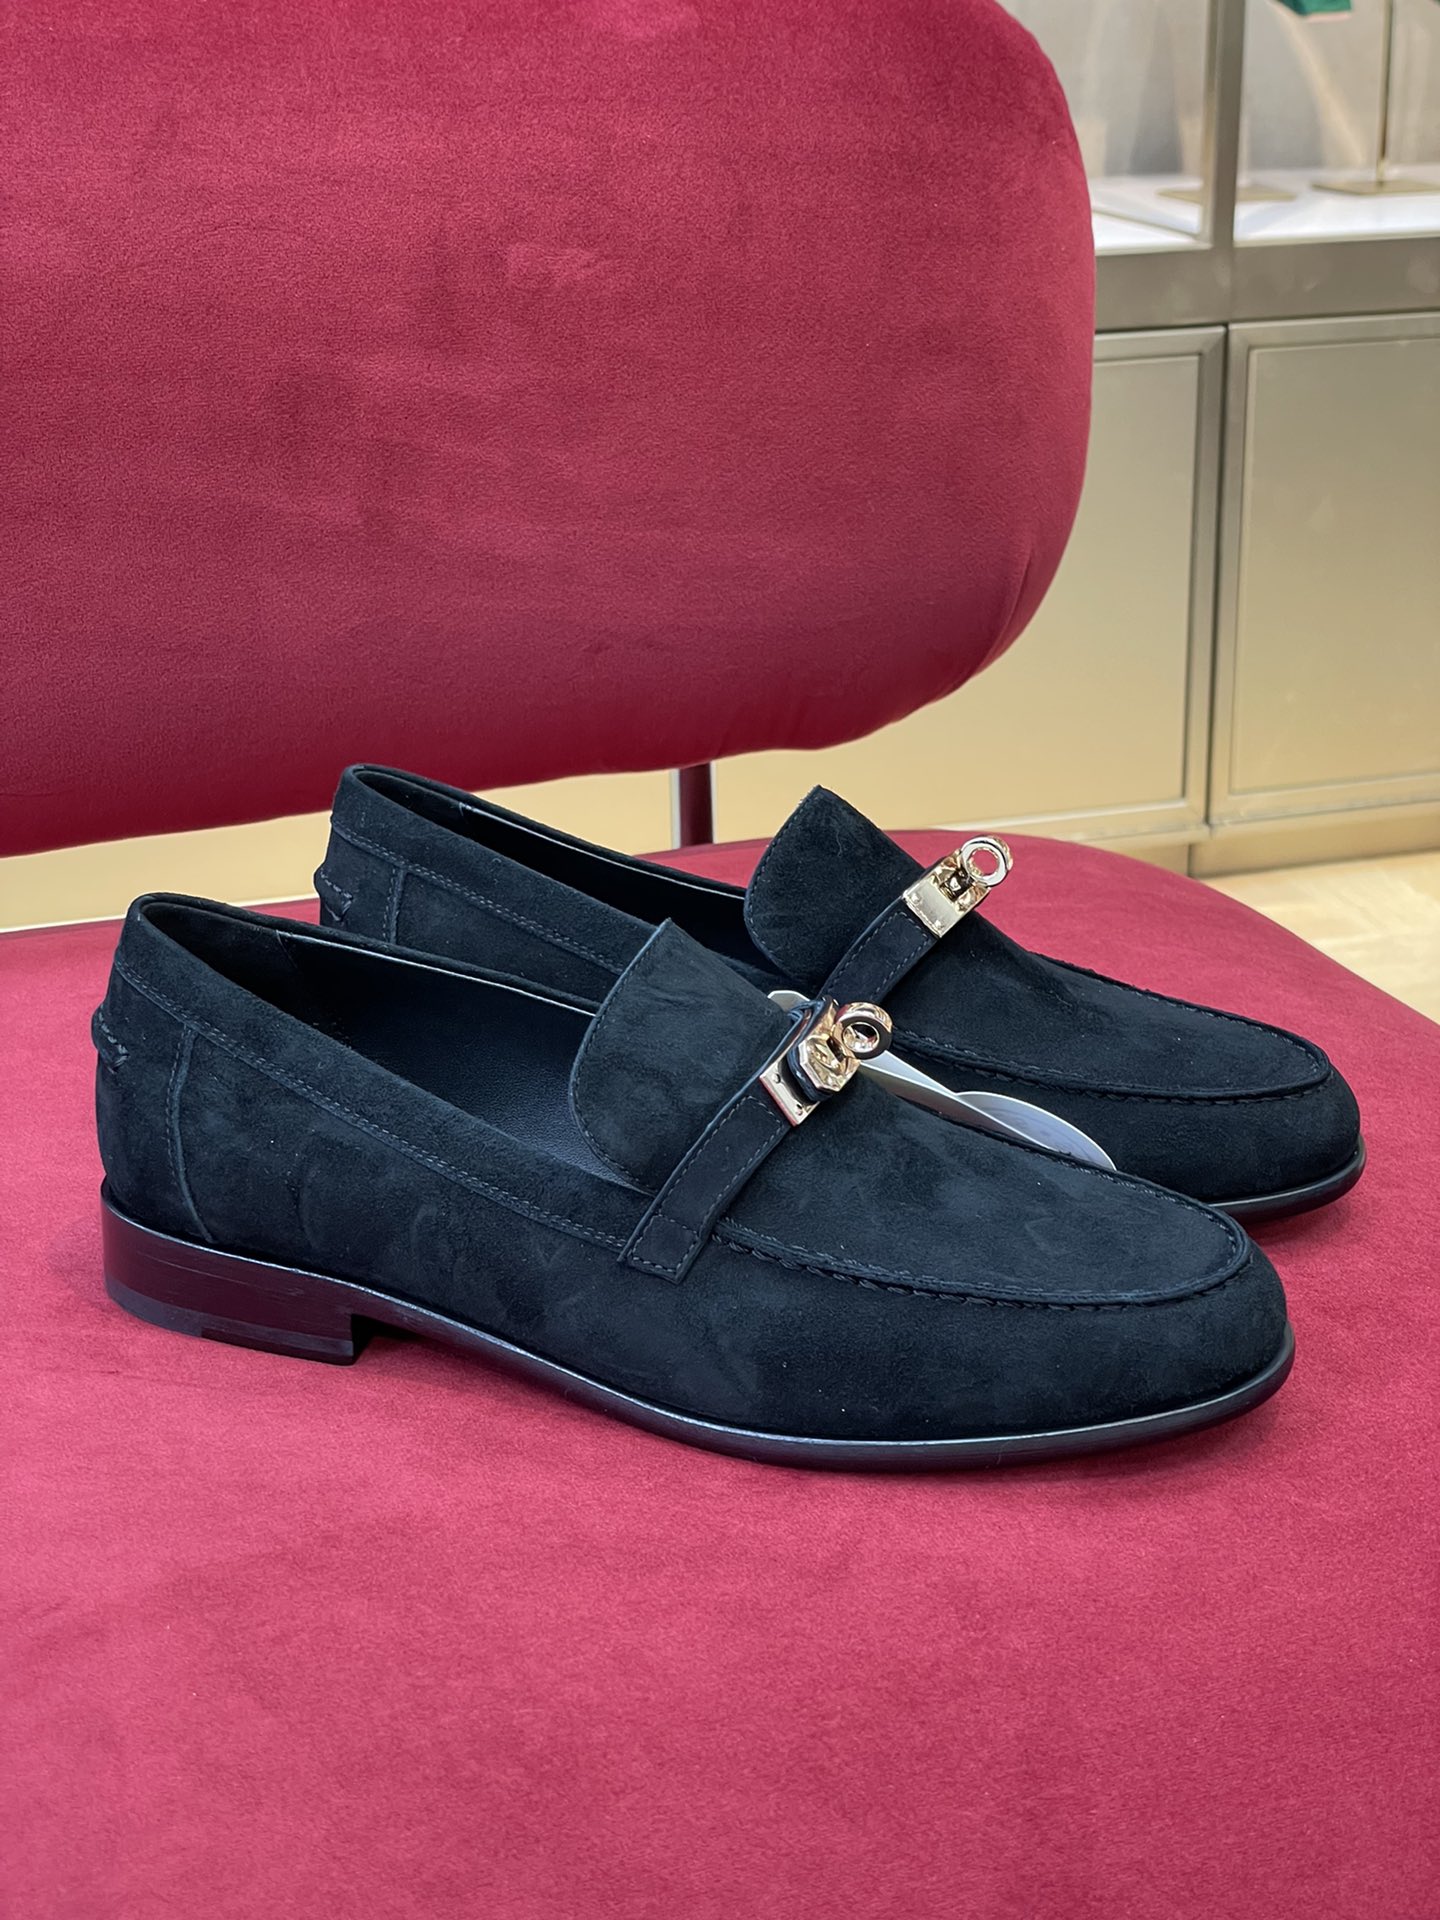 Hermes Kelly Shoes Loafers Calfskin Cowhide Sheepskin Fall/Winter Collection